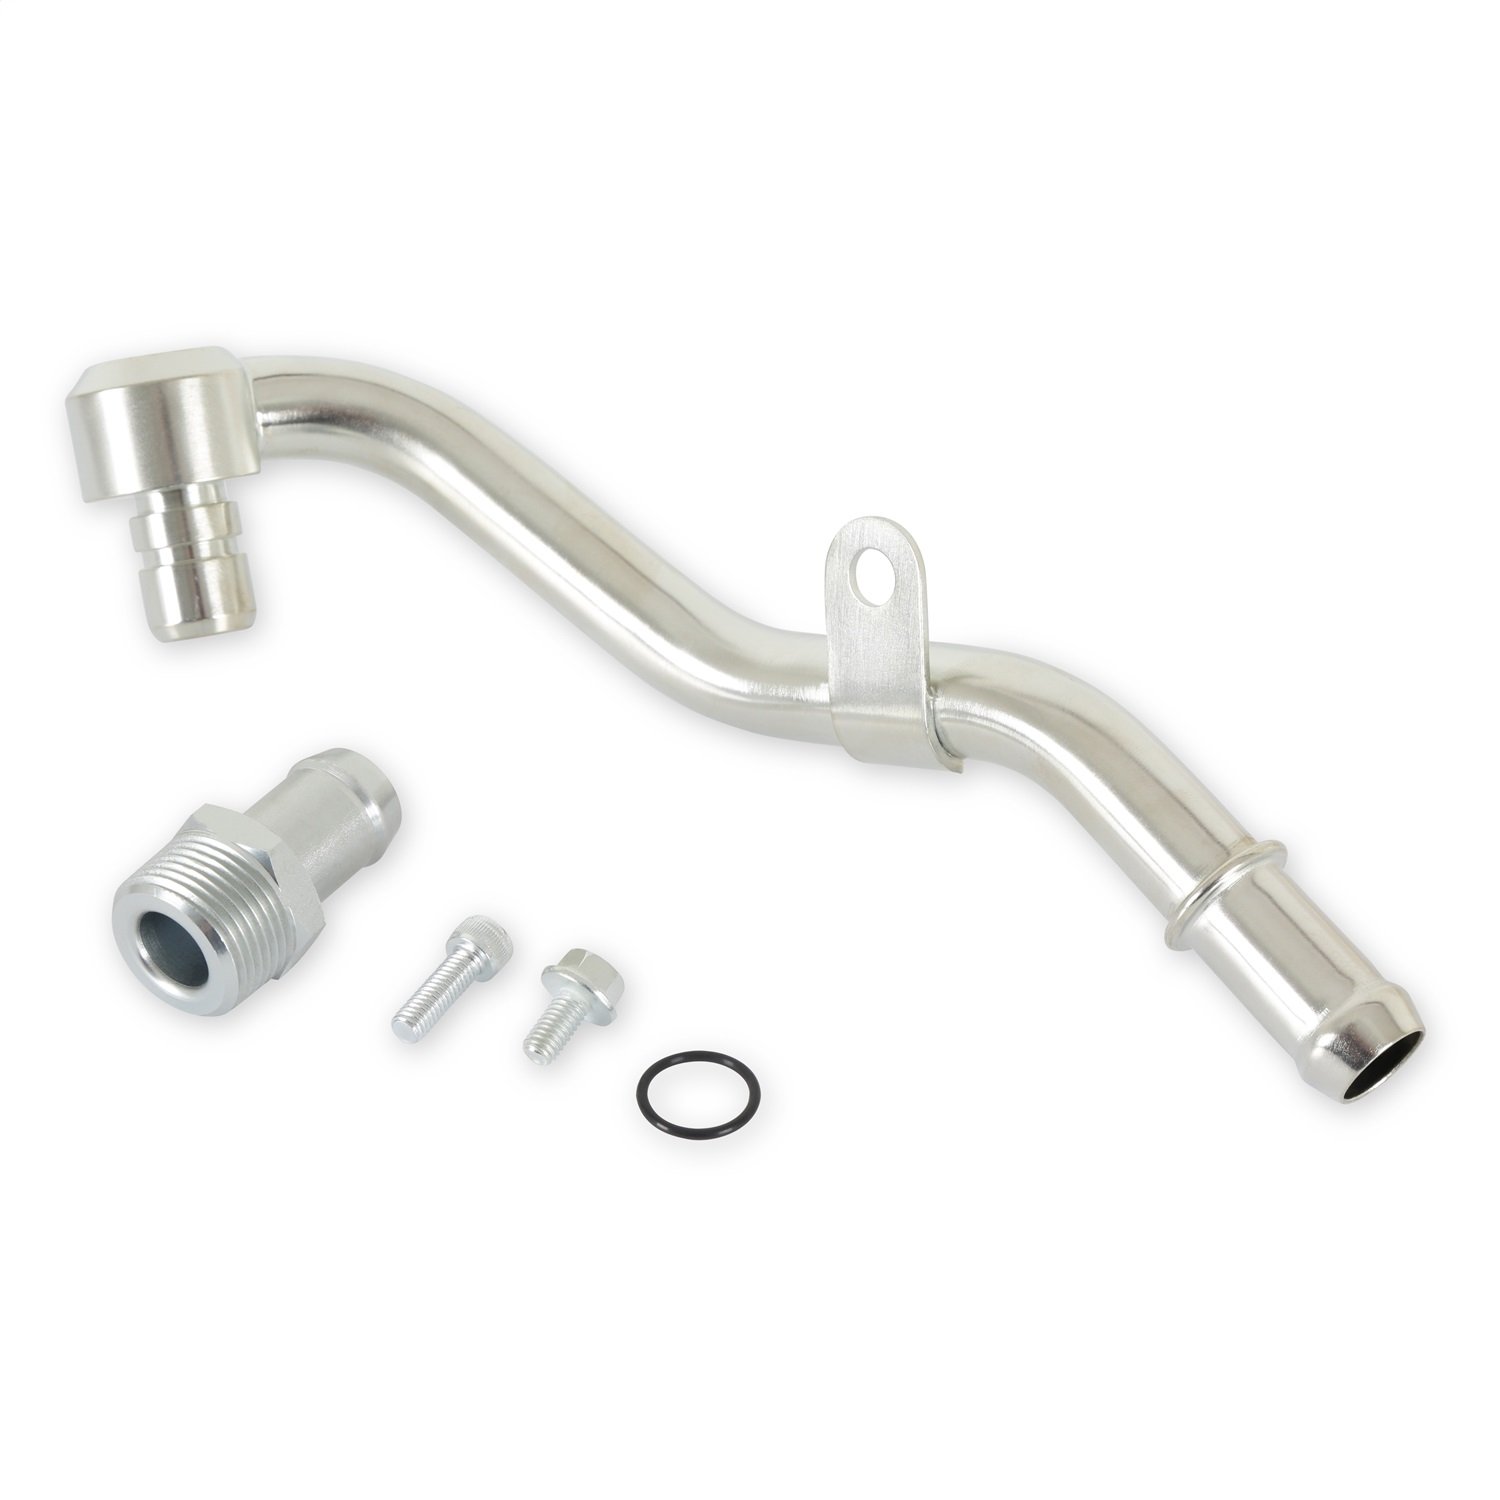 300-901 Heater Hose Adapter Kit for Ford 7.3L Godzilla w/ Holley High Mount Accessory Drive System